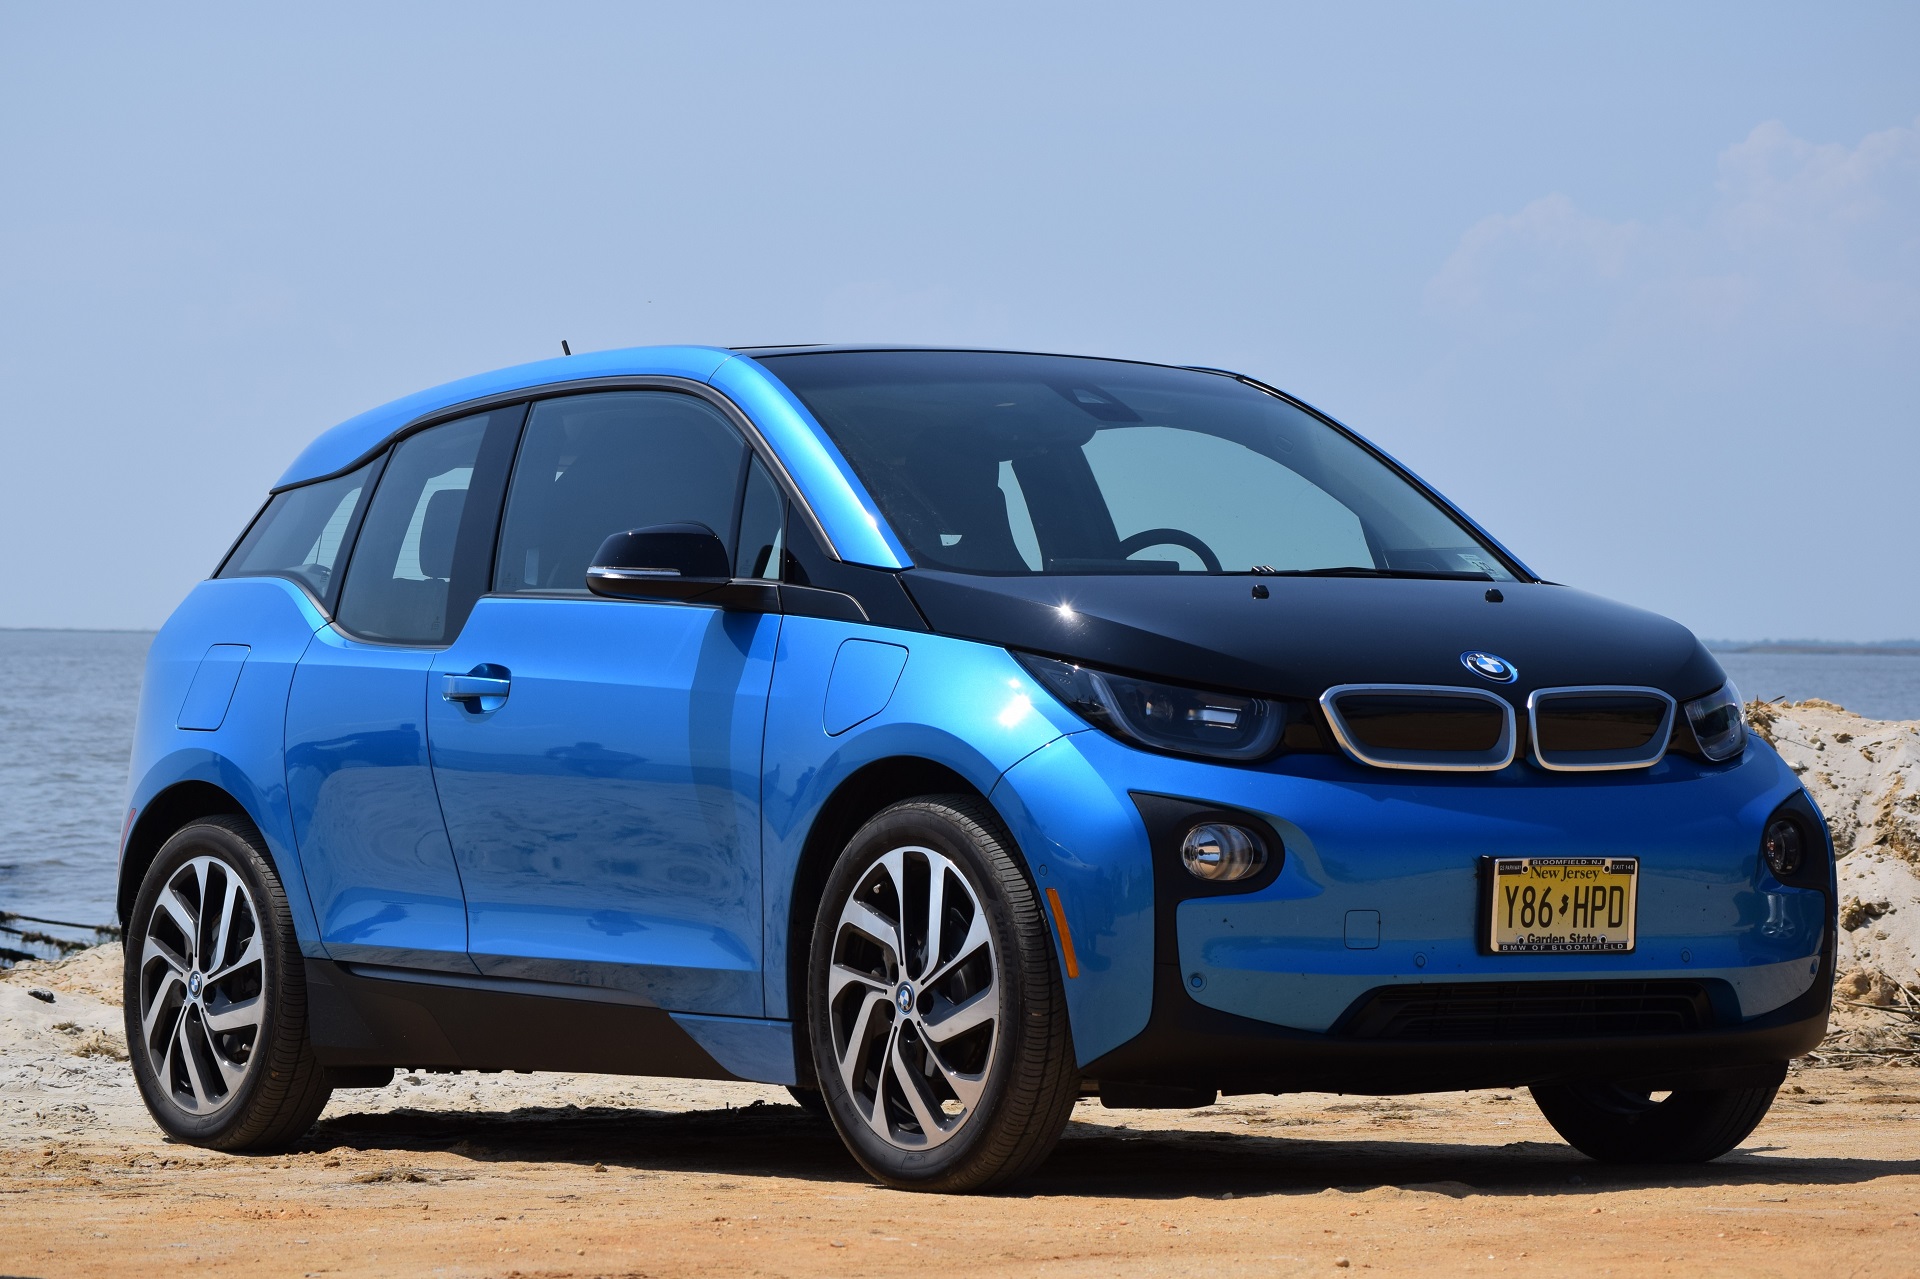 bmw-i3-electric-car-sales-stopped-future-recall-announced-for-specific